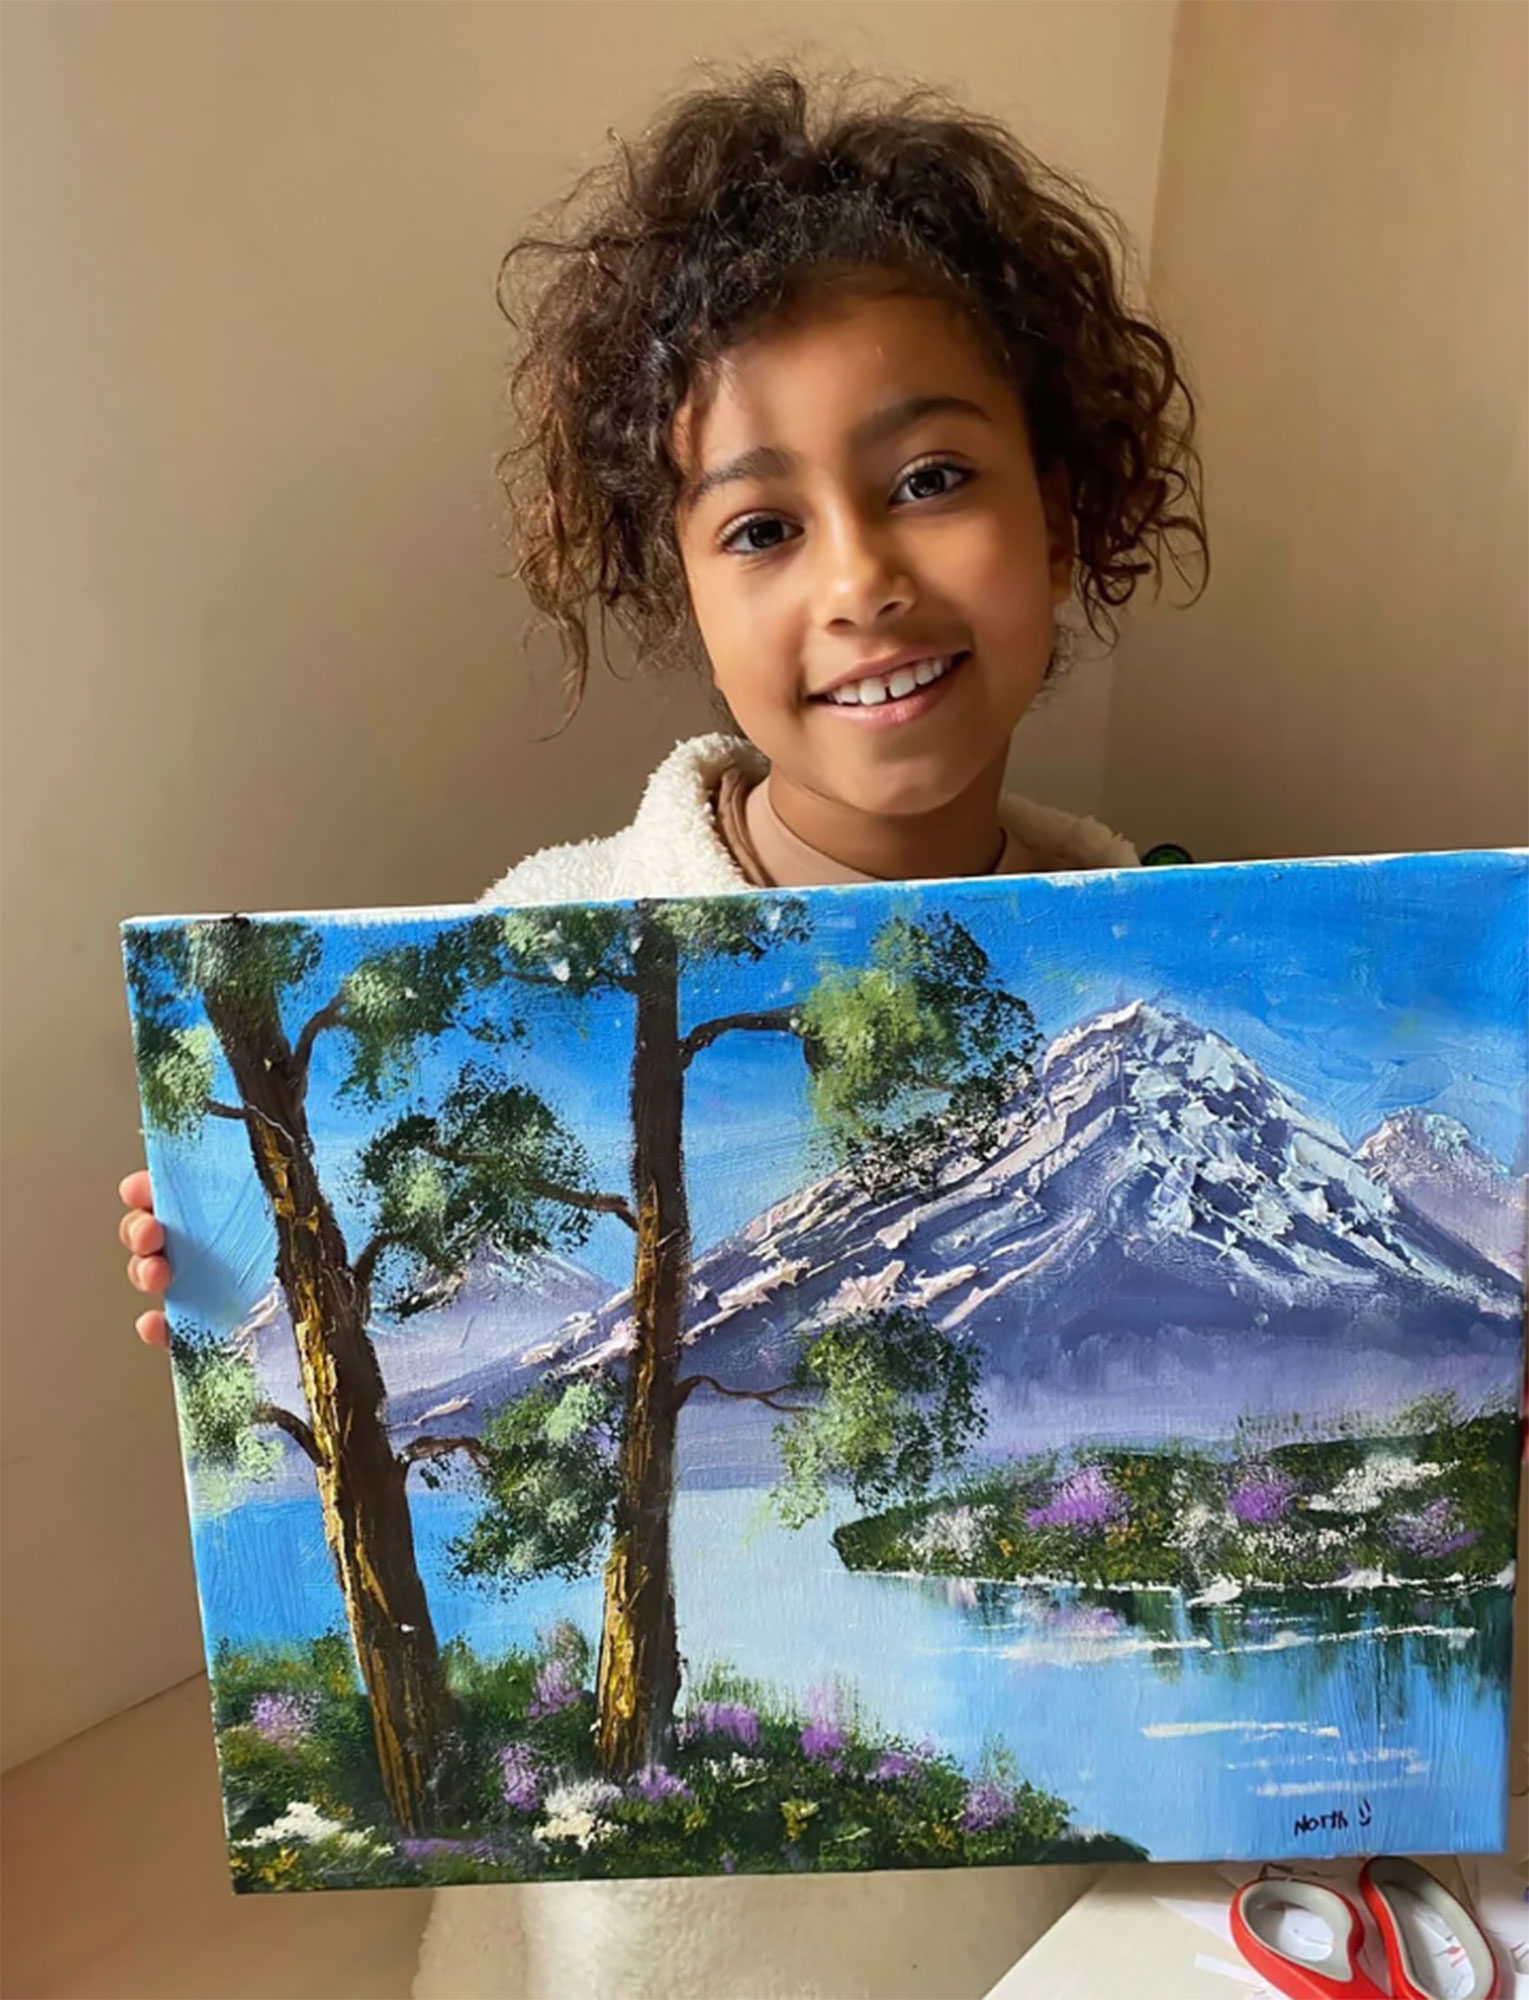 North West’s Paintings, Drawings and More Photos of Her Artwork